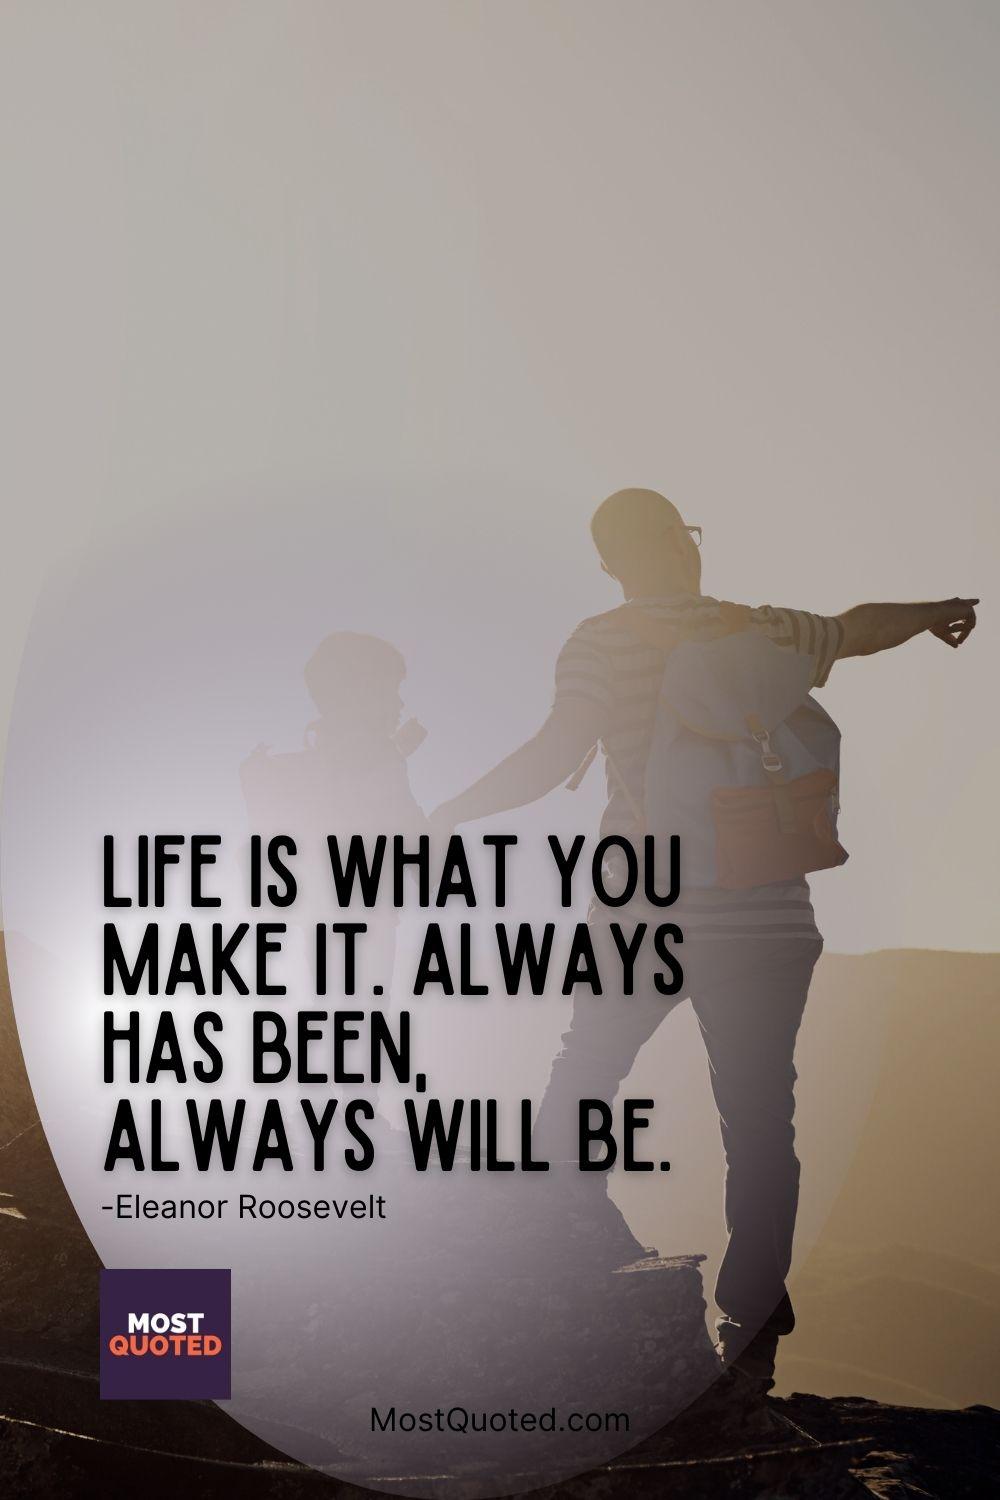 Life is what you make it. Always has been, always will be. - Eleanor Roosevelt